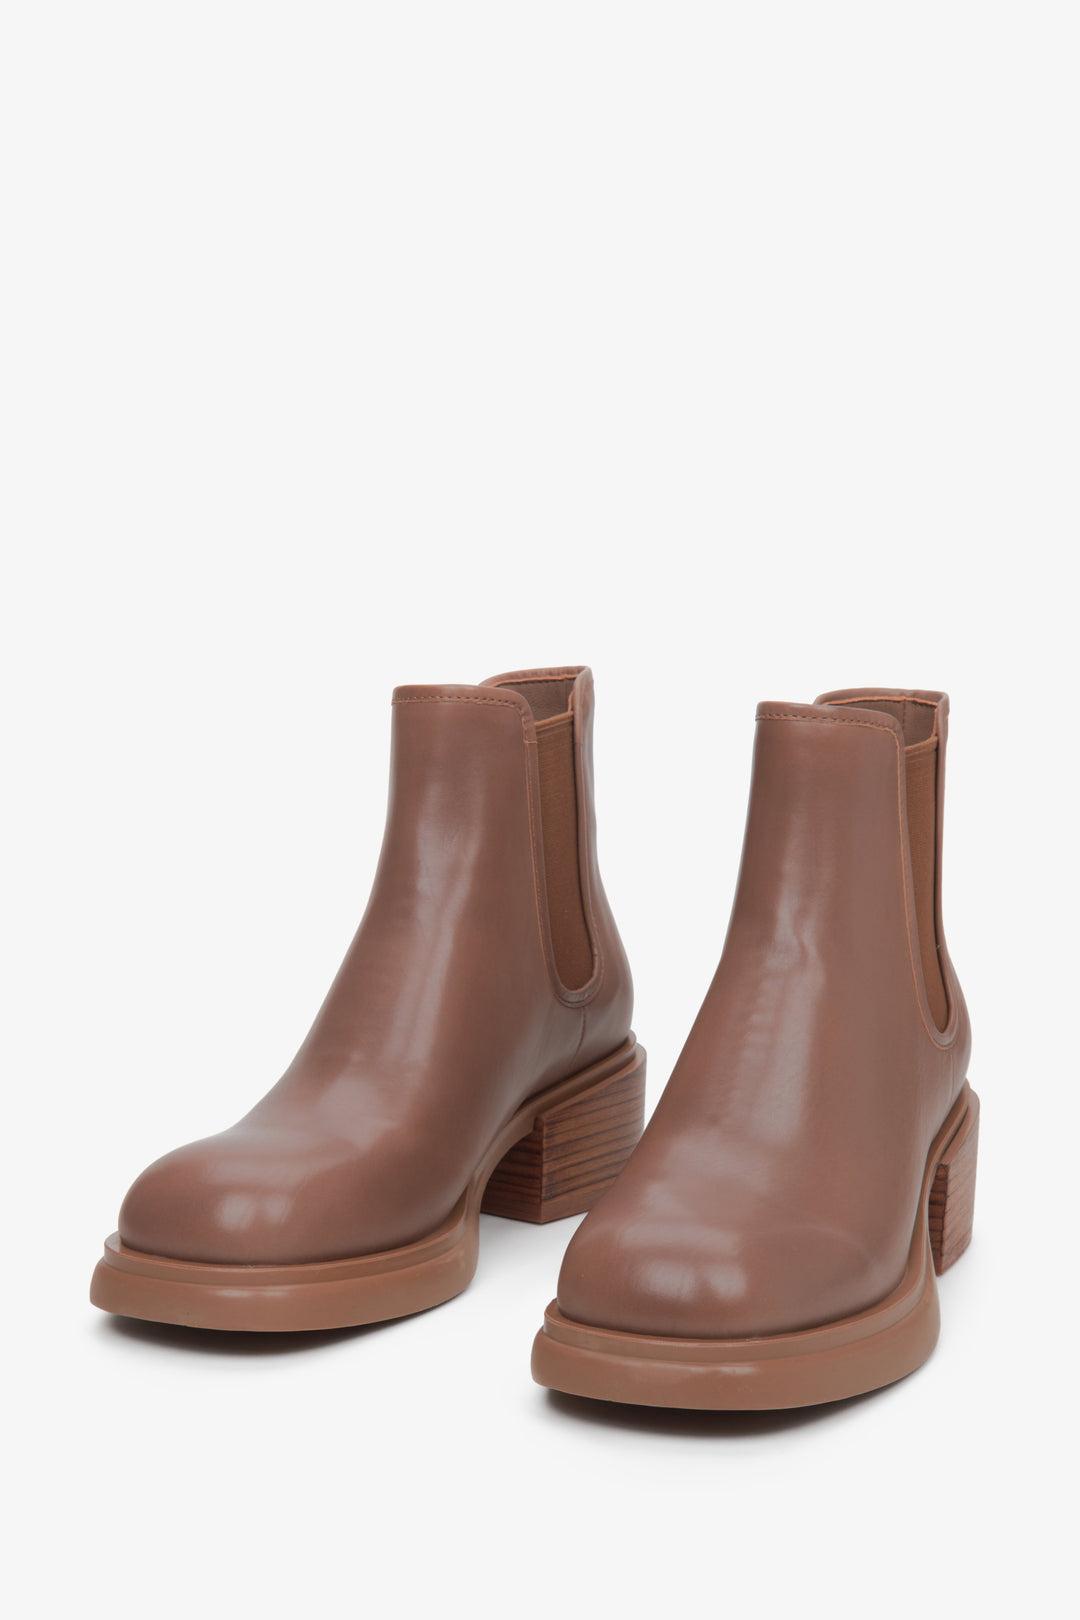 Women's brown ankle boots on a sturdy block heel Estro.